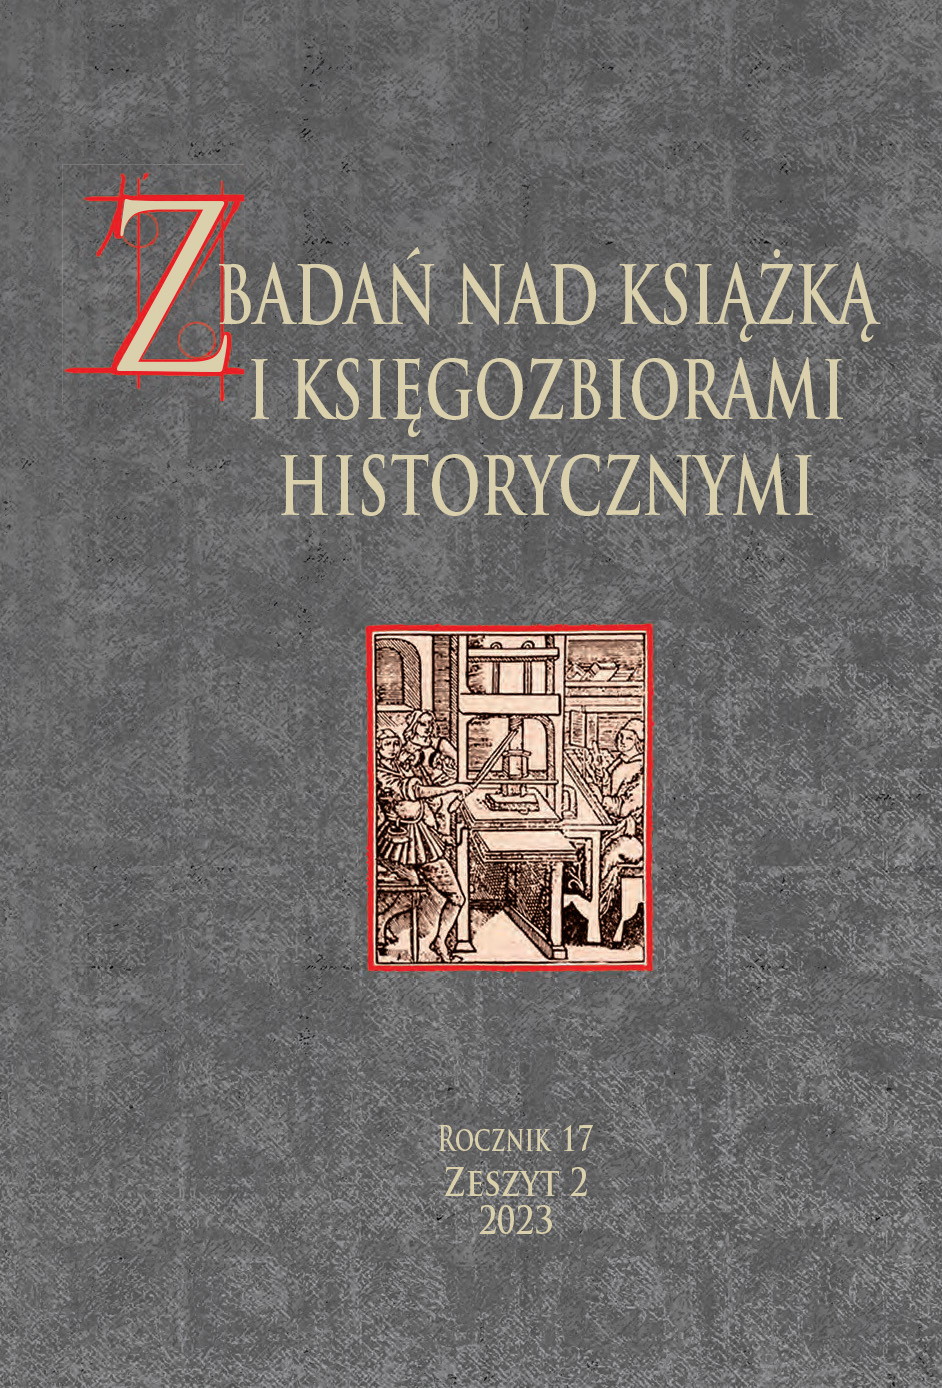 The Cultural and Historical Legacy of Acad. Stefan Mladenov (1880–1963)